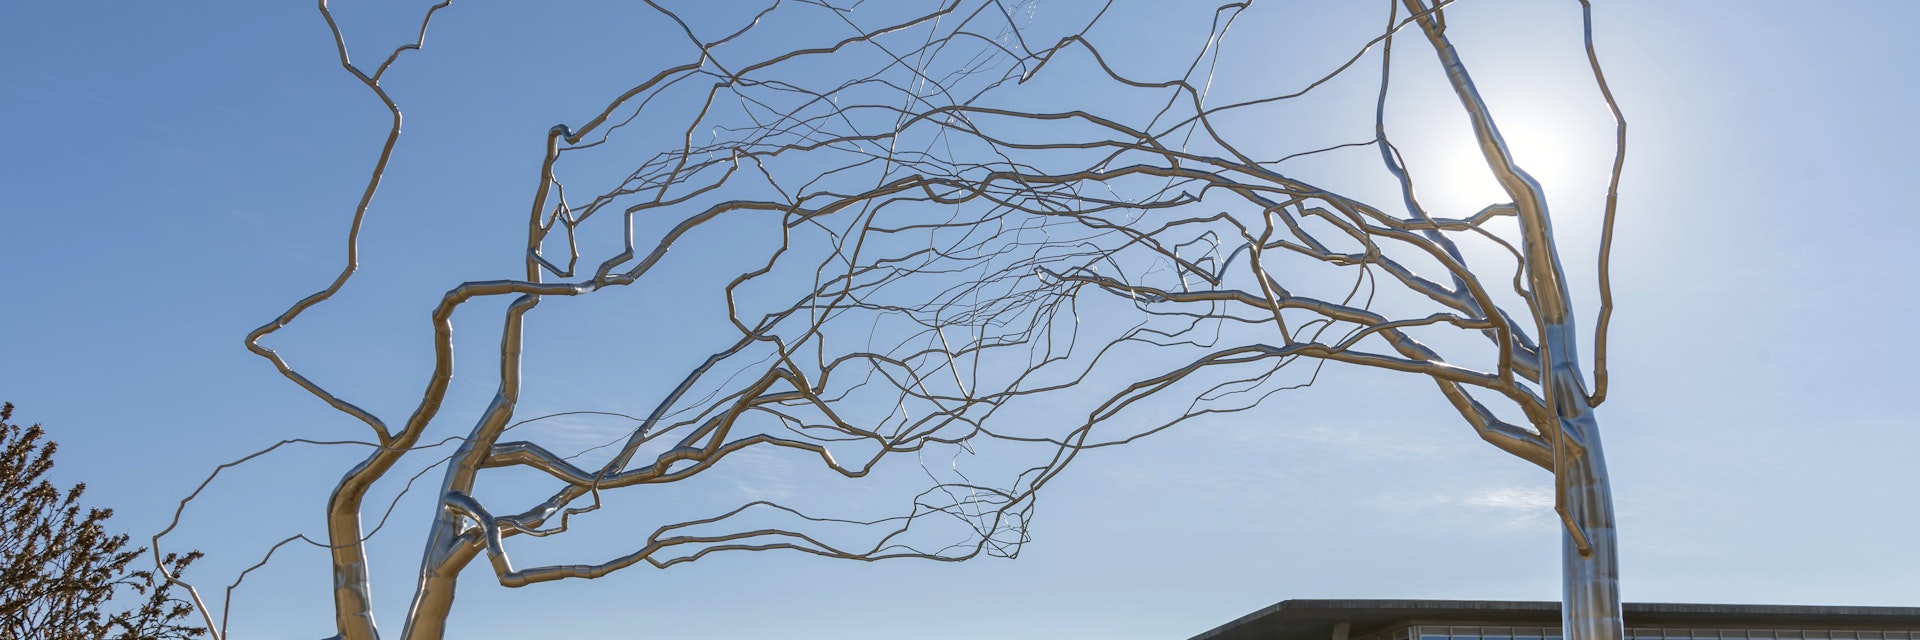 FORT WORTH, UNITED STATES - Dec 29, 2018: Roxy Paine Trees at Fort Worth Modern Art Museum  The stainless steel is bent into lifelike shapes  Also The museum and reflecting pond